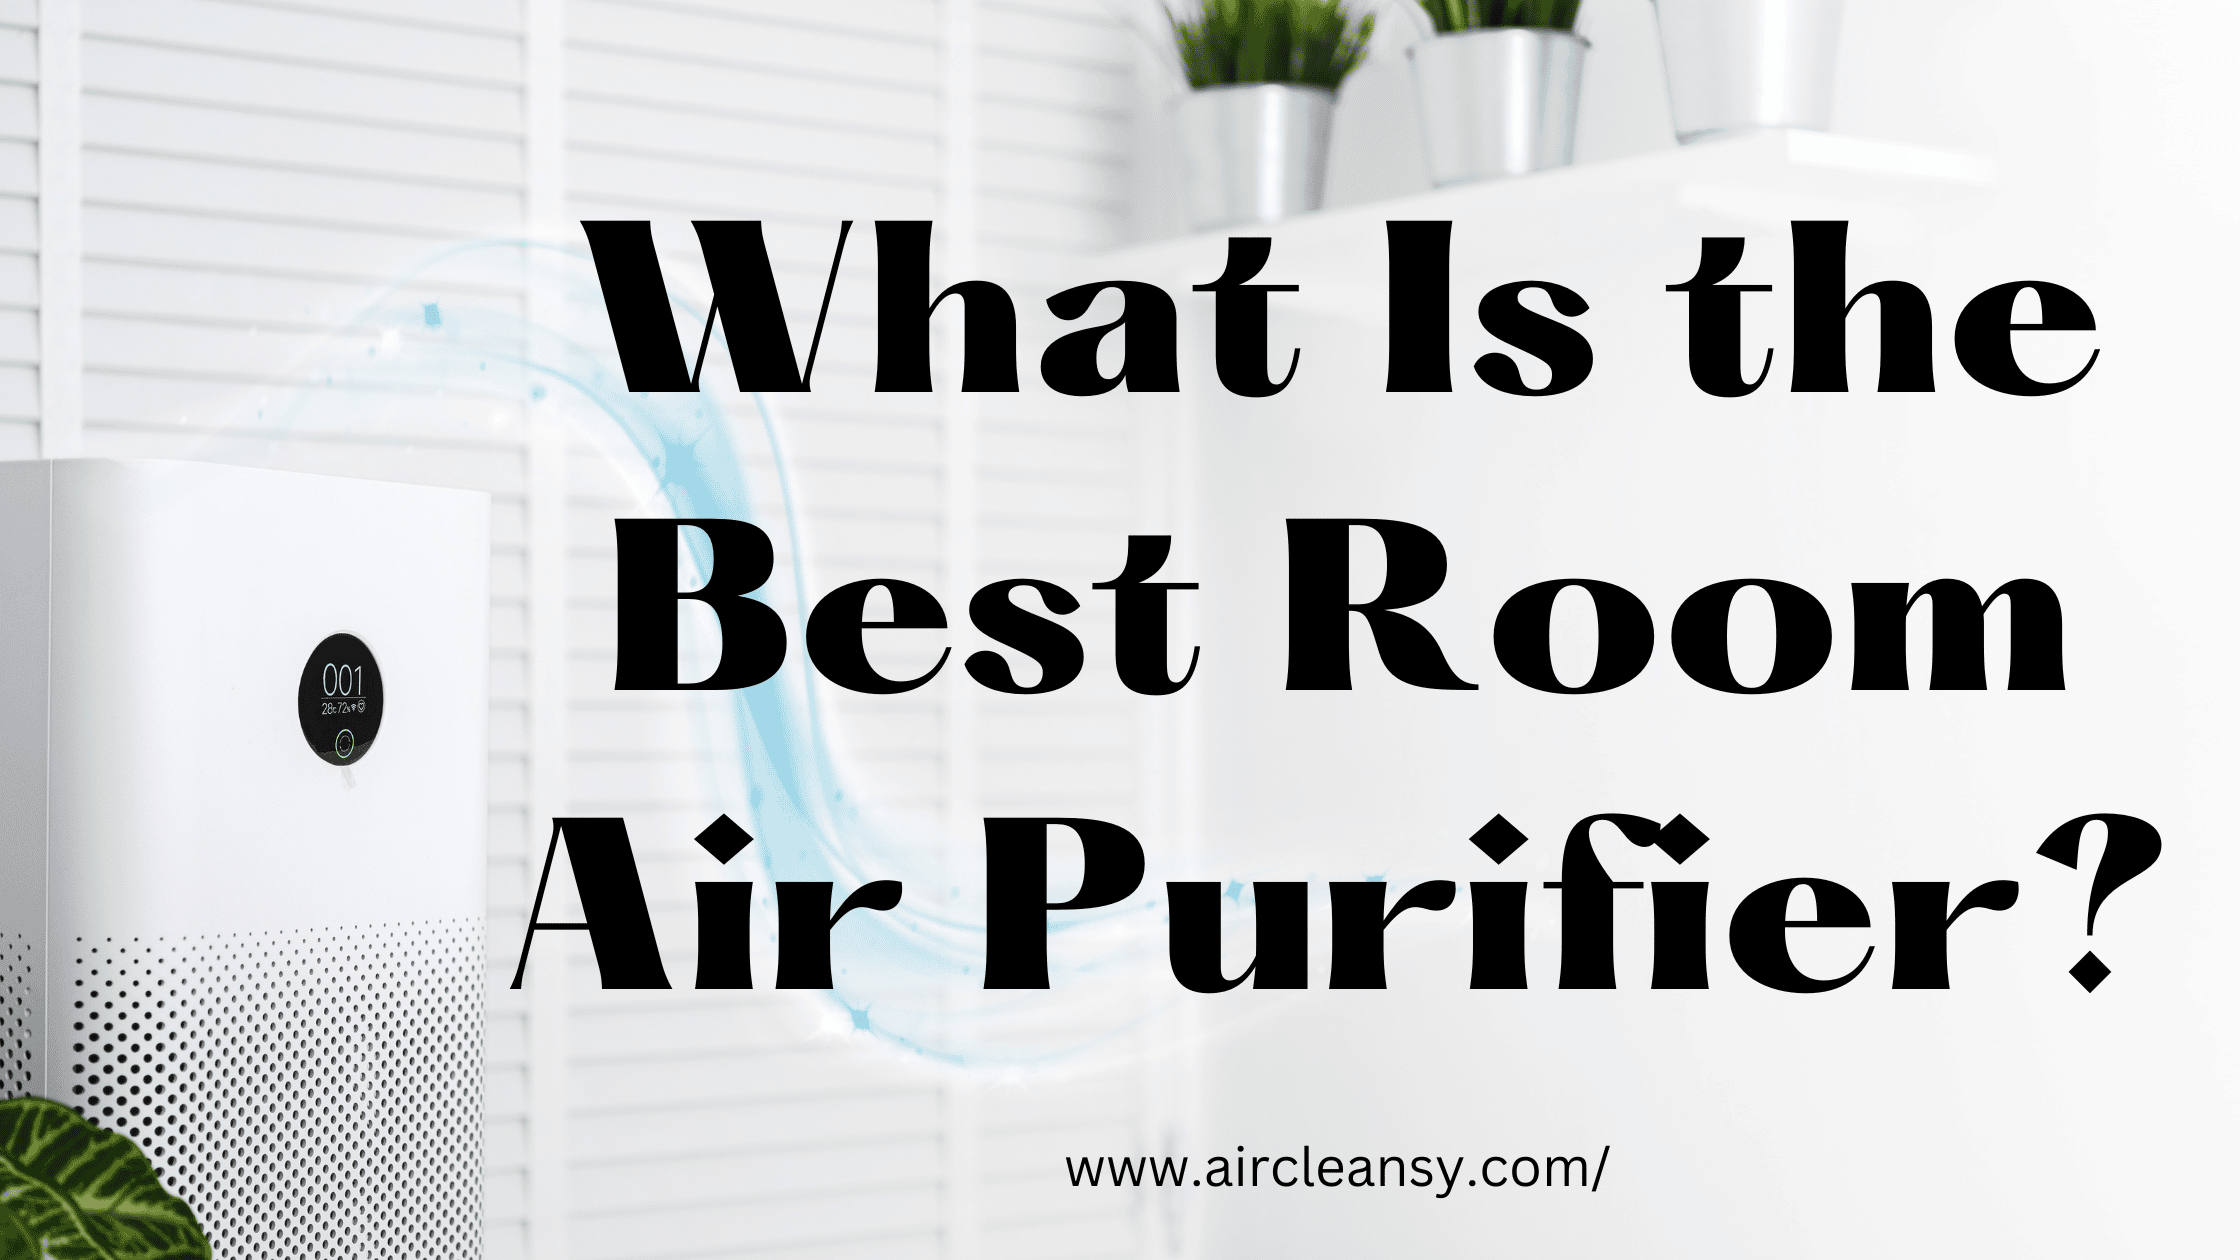 What Is the Best Room Air Purifier